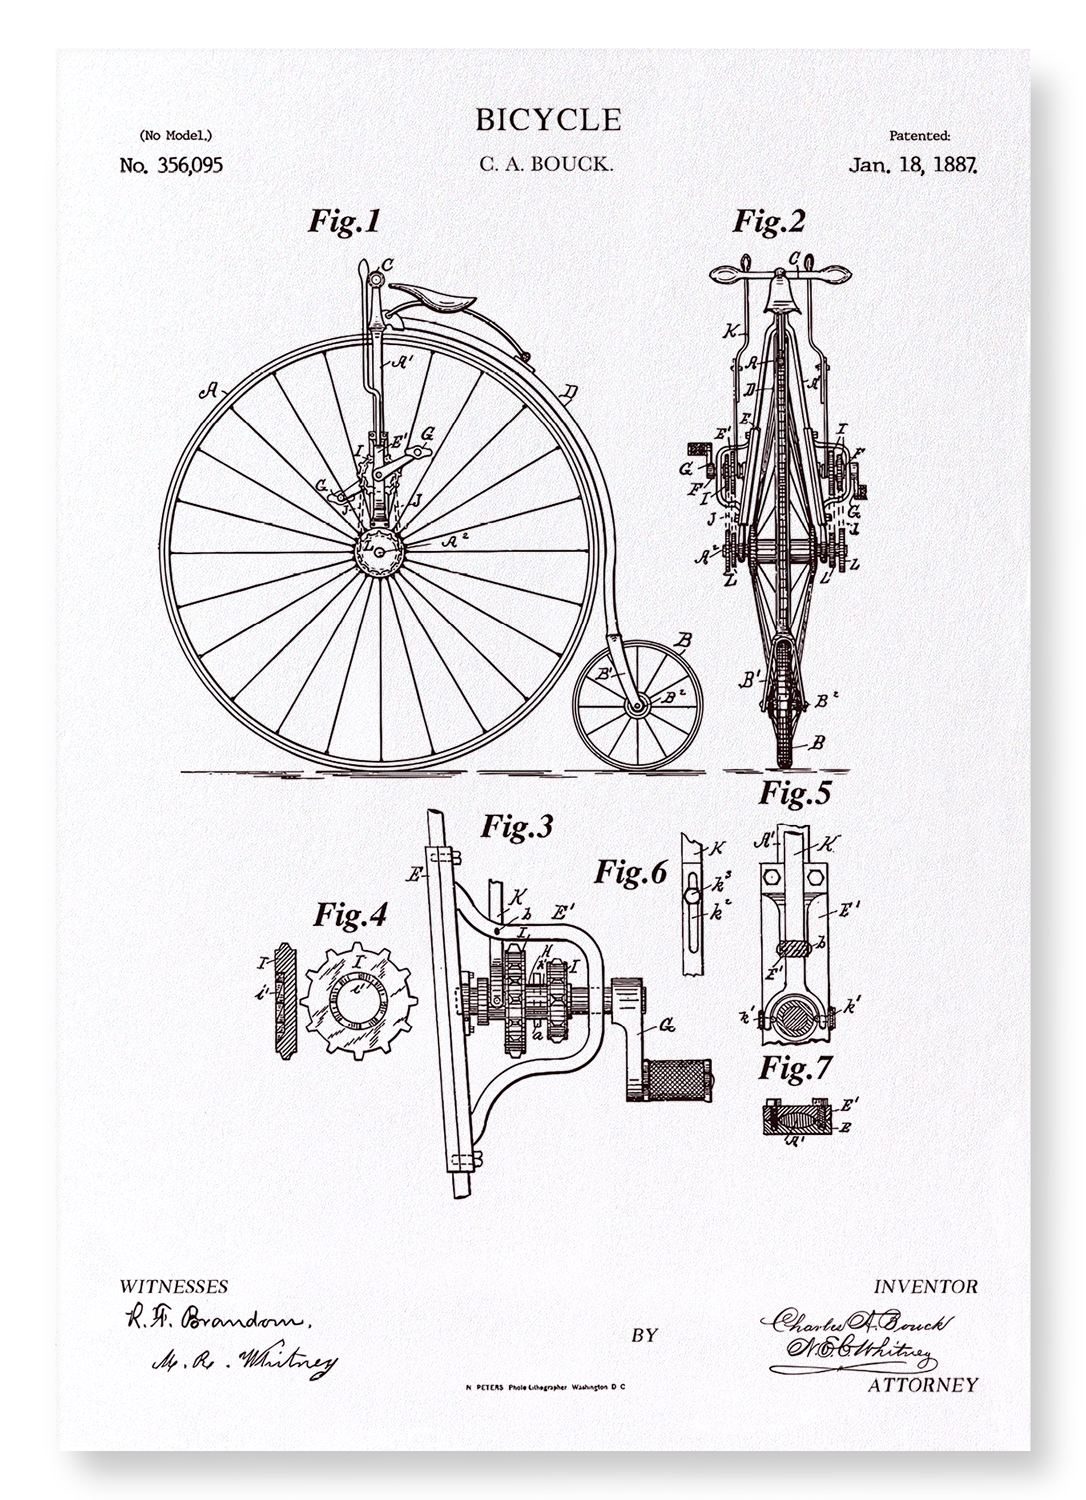 PATENT OF BICYCLE (1887)